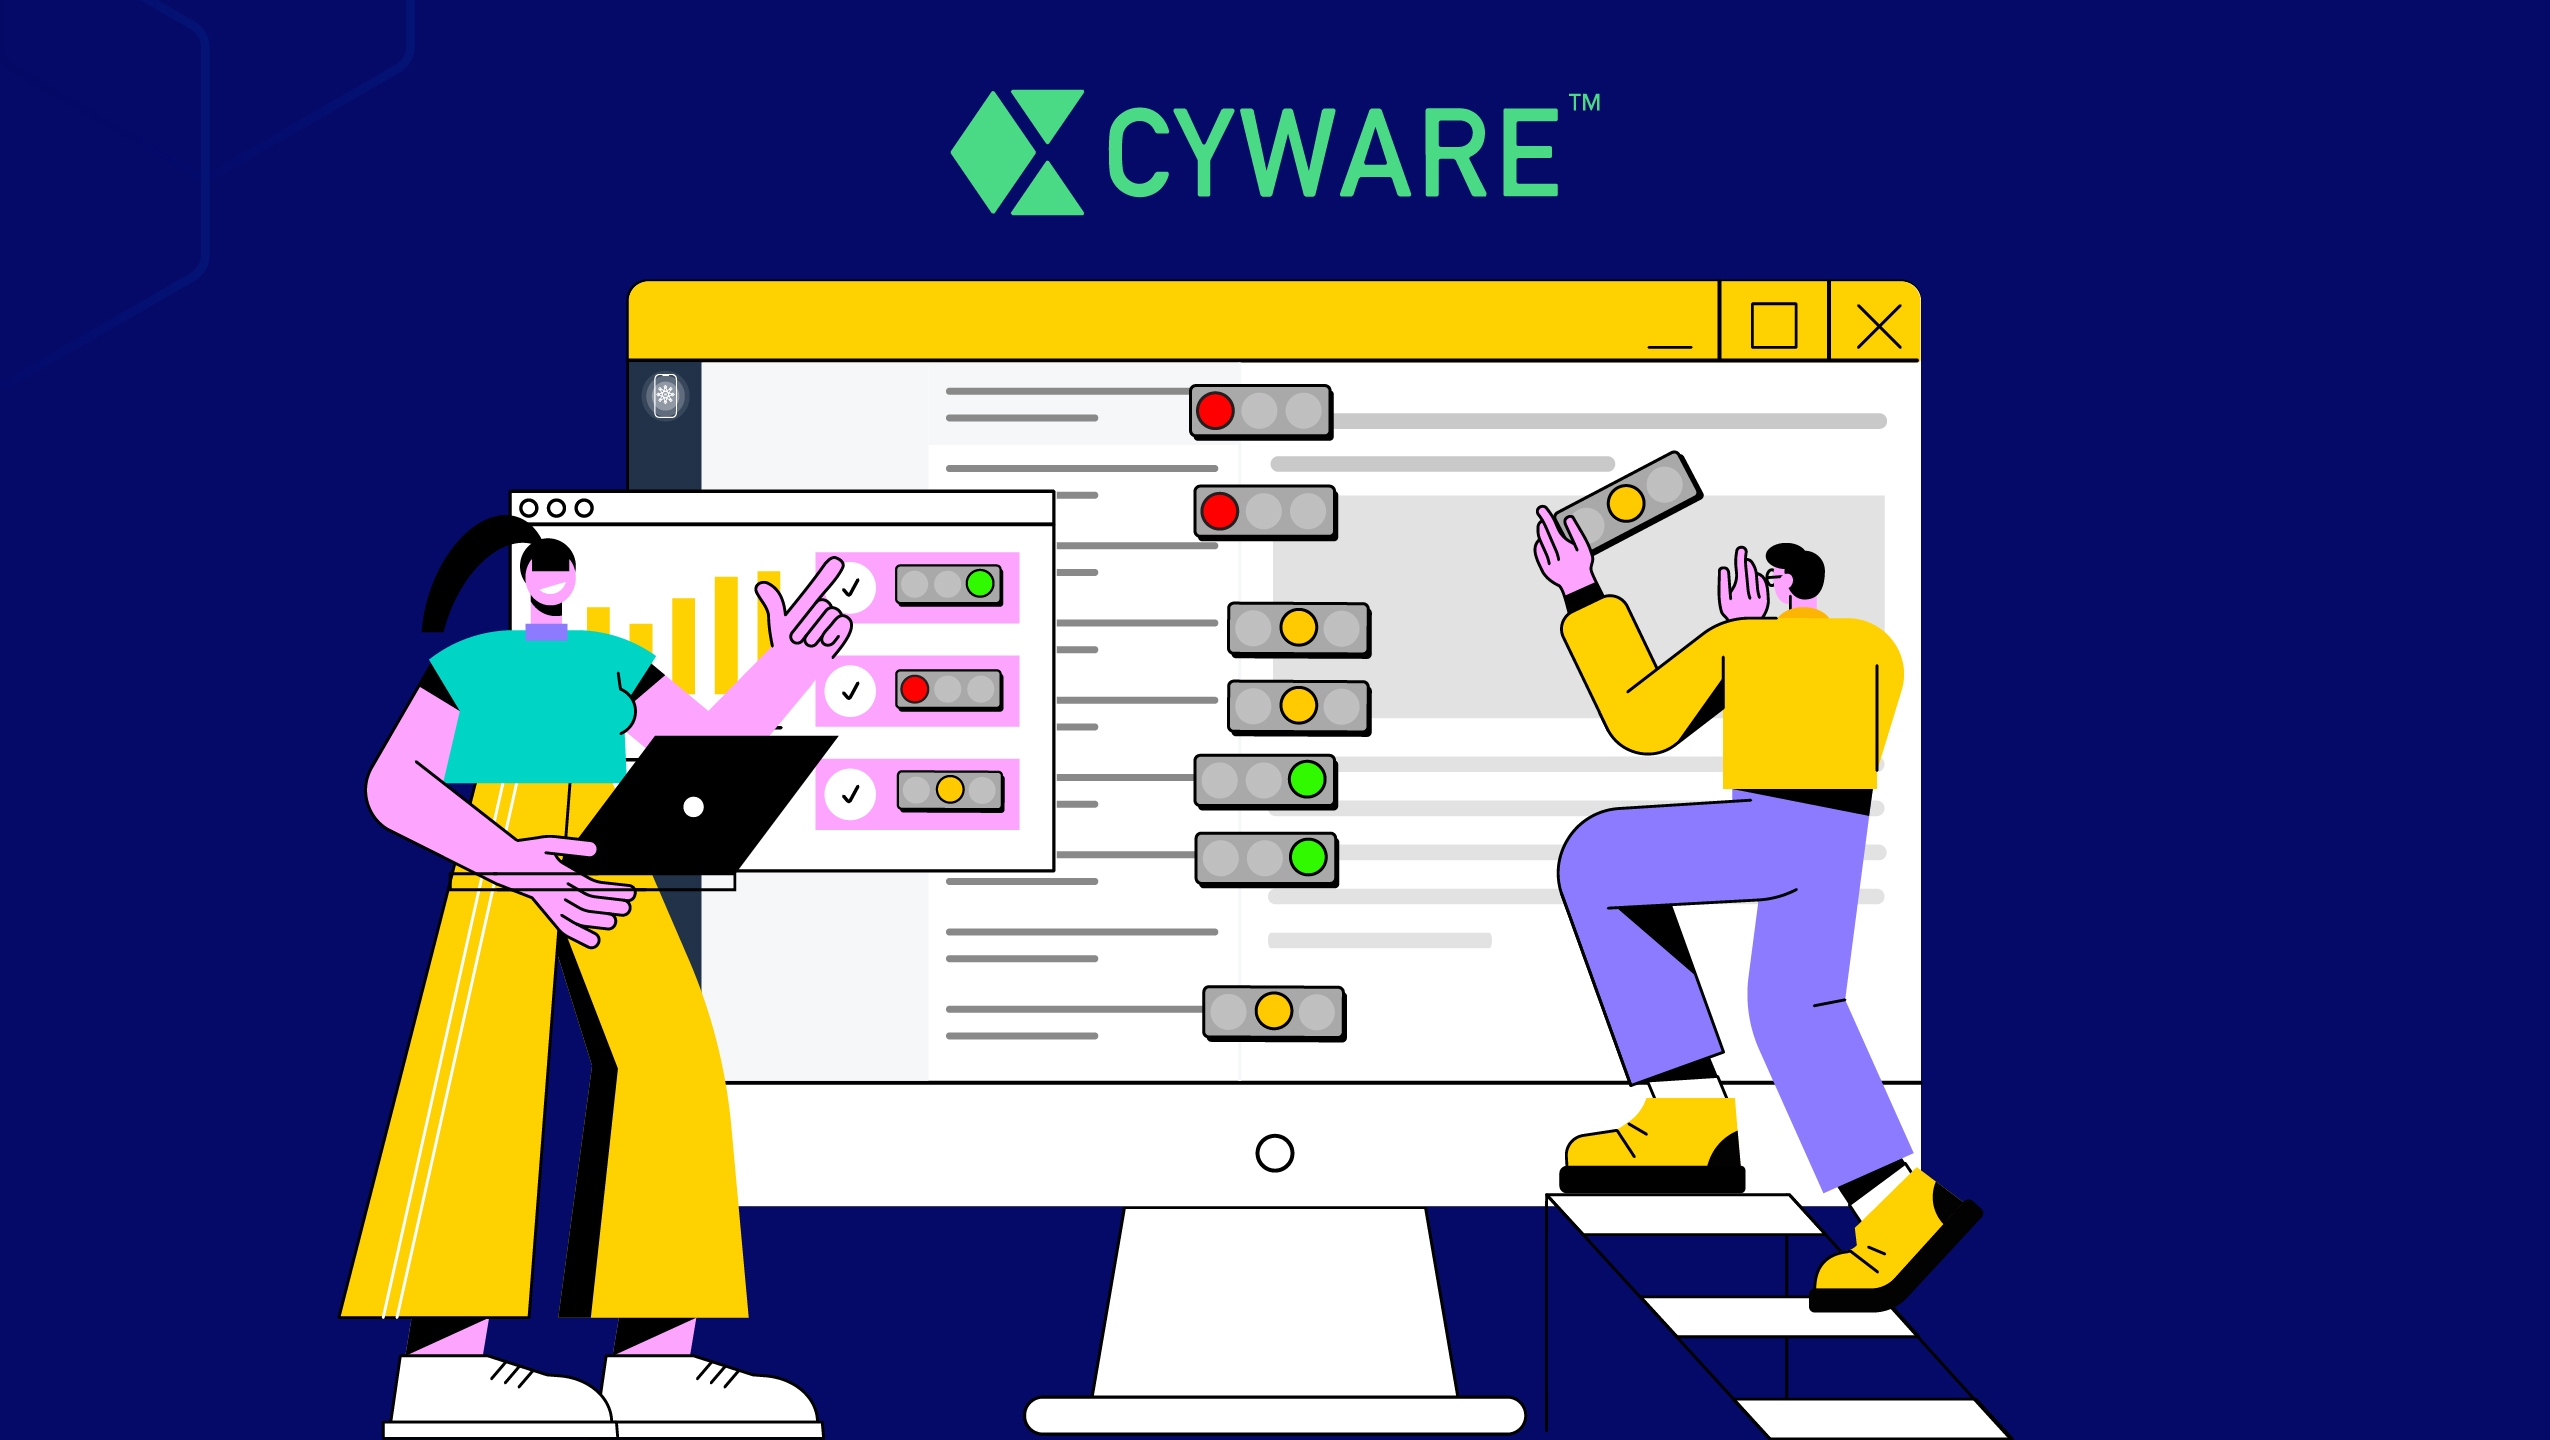 Traffic Light Protocol (TLP) 2.0 Threat Intel Sharing Standard Now Available for Cyware Customers